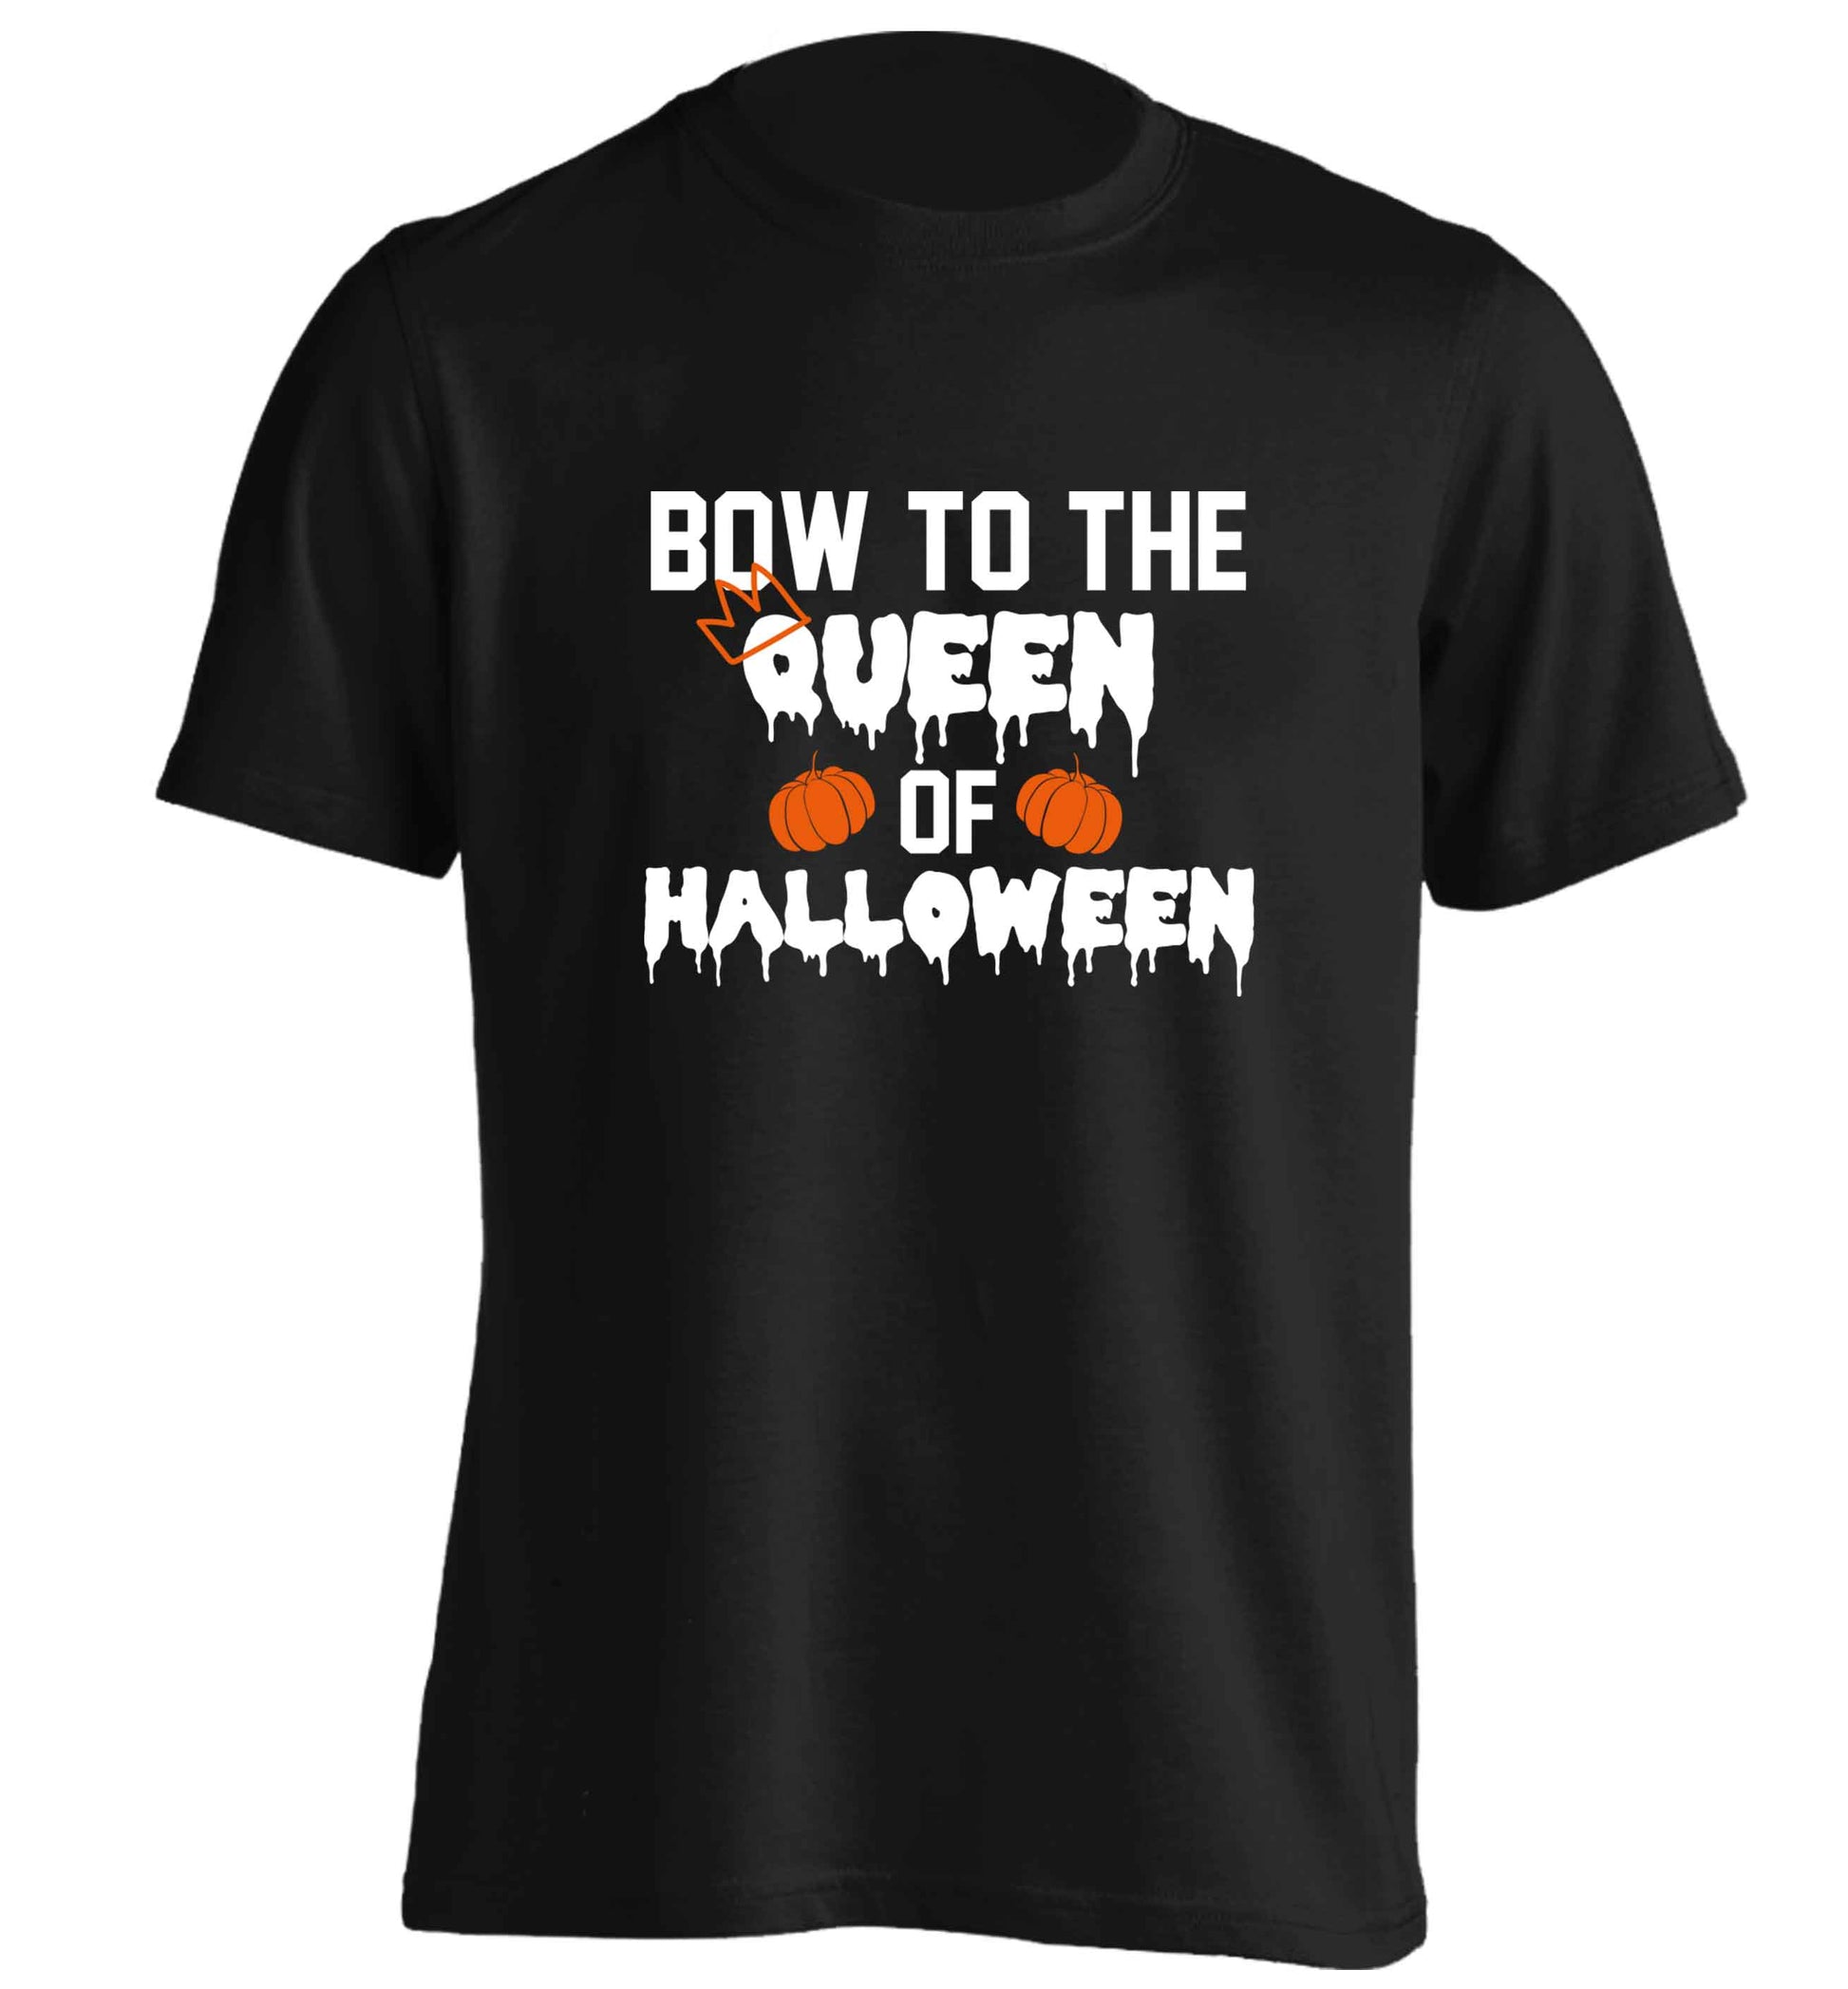 Bow to the Queen of halloween adults unisex black Tshirt 2XL